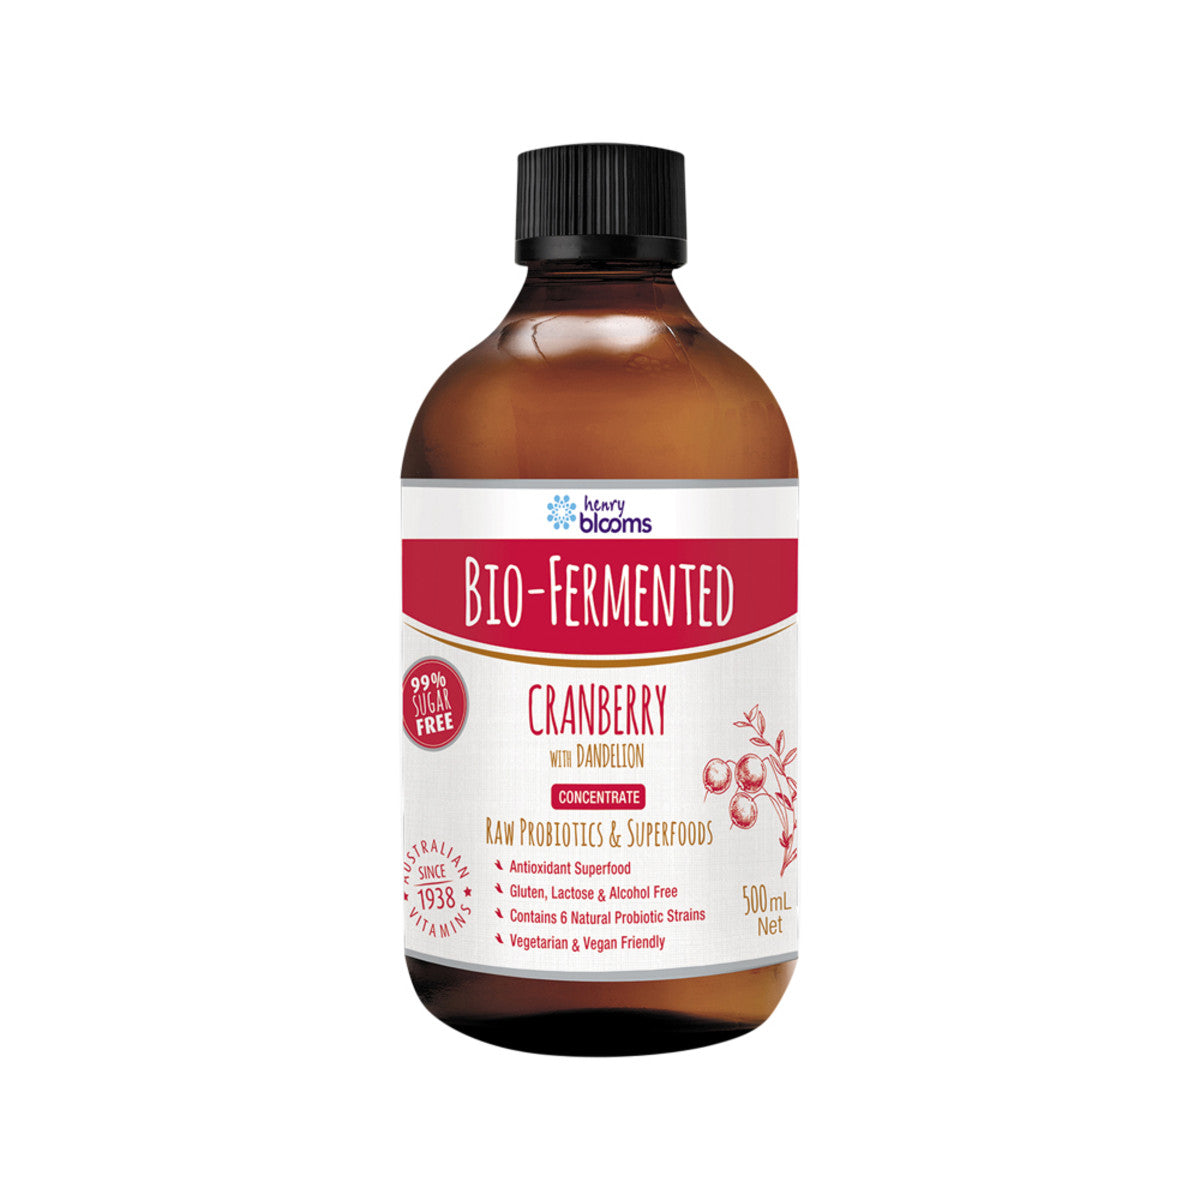 Henry Blooms - Bio Fermented Cranberry with Dandelion Concentrate (with Dandelion)